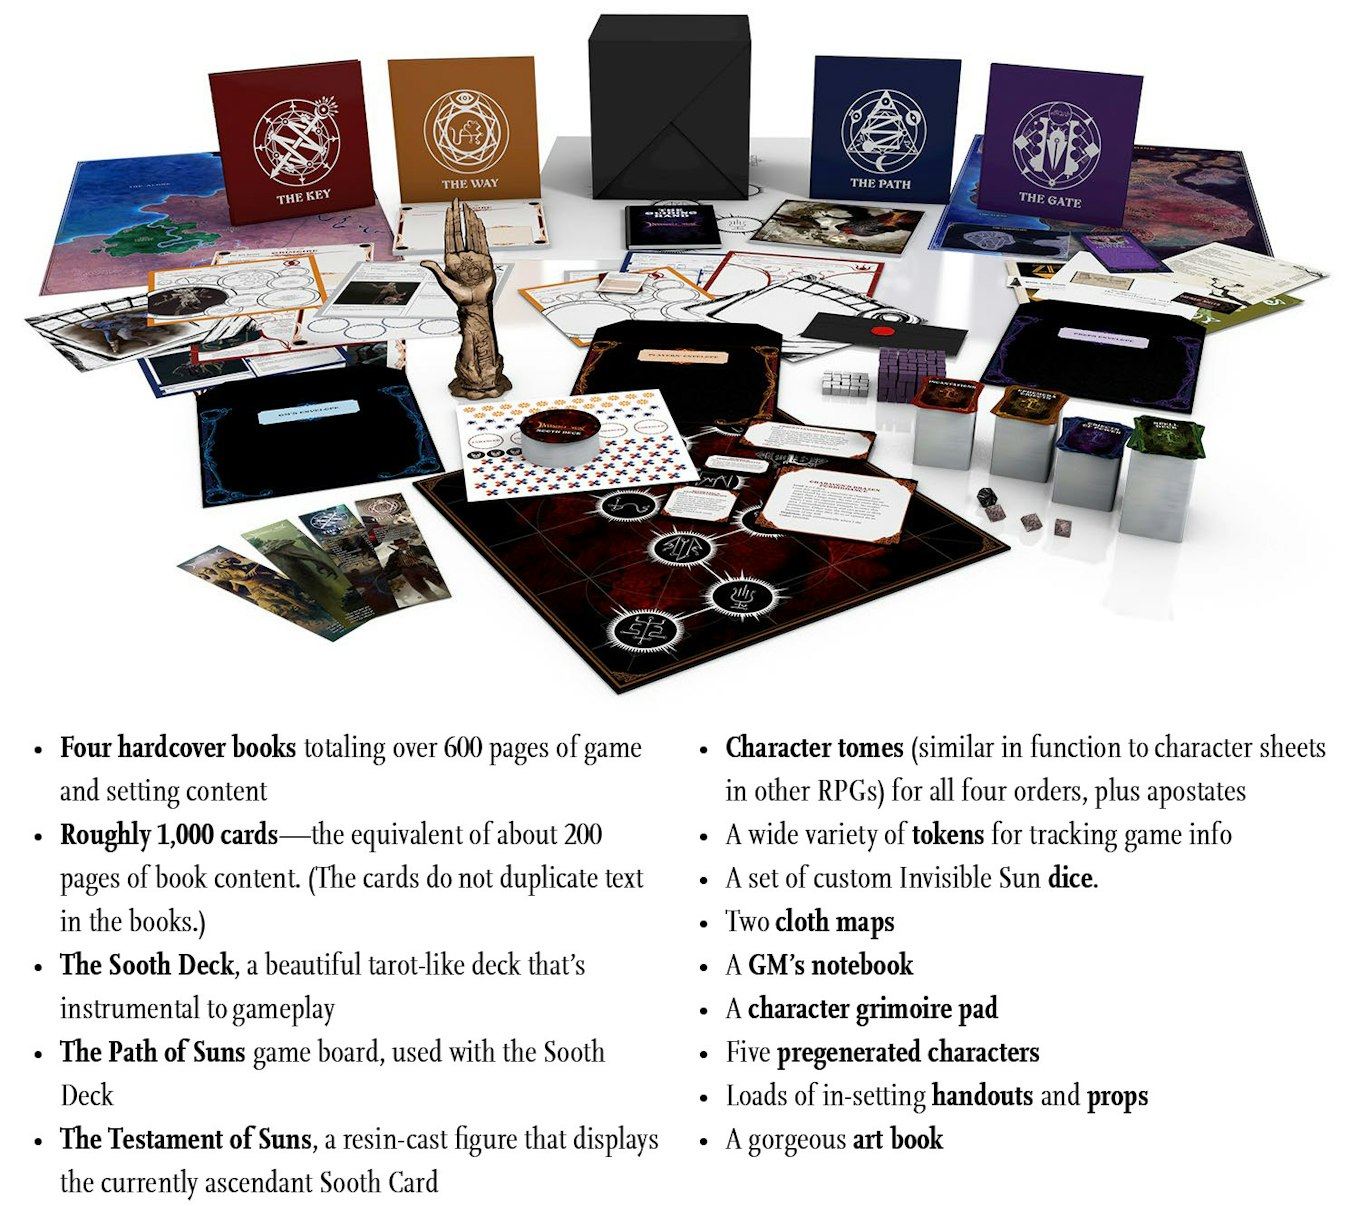 An image showing the full contents of the black cube, including:• Four hardcover books totaling over 600 pages of game and setting content. • Roughly 1,000 cards—the equivalent of about 200 pages of book content. (The cards do not duplicate text in the books.) • The Sooth Deck, a beautiful tarot-like deck that’s instrumental to gameplay. • The Path of Suns game board, used with the Sooth Deck. • The Testament of Suns, a resin-cast figure that displays the currently ascendant Sooth Card. • Character tomes (similar in function to character sheets in other RPGs) for all four orders, plus apostates. • A wide variety of tokens for tracking game info. • A set of custom Invisible Sun dice. • Two cloth maps. • A GM’s notebook. • A character grimoire pad. • Five pregenerated characters. • Loads of in-setting handouts and props. • A gorgeous art book.